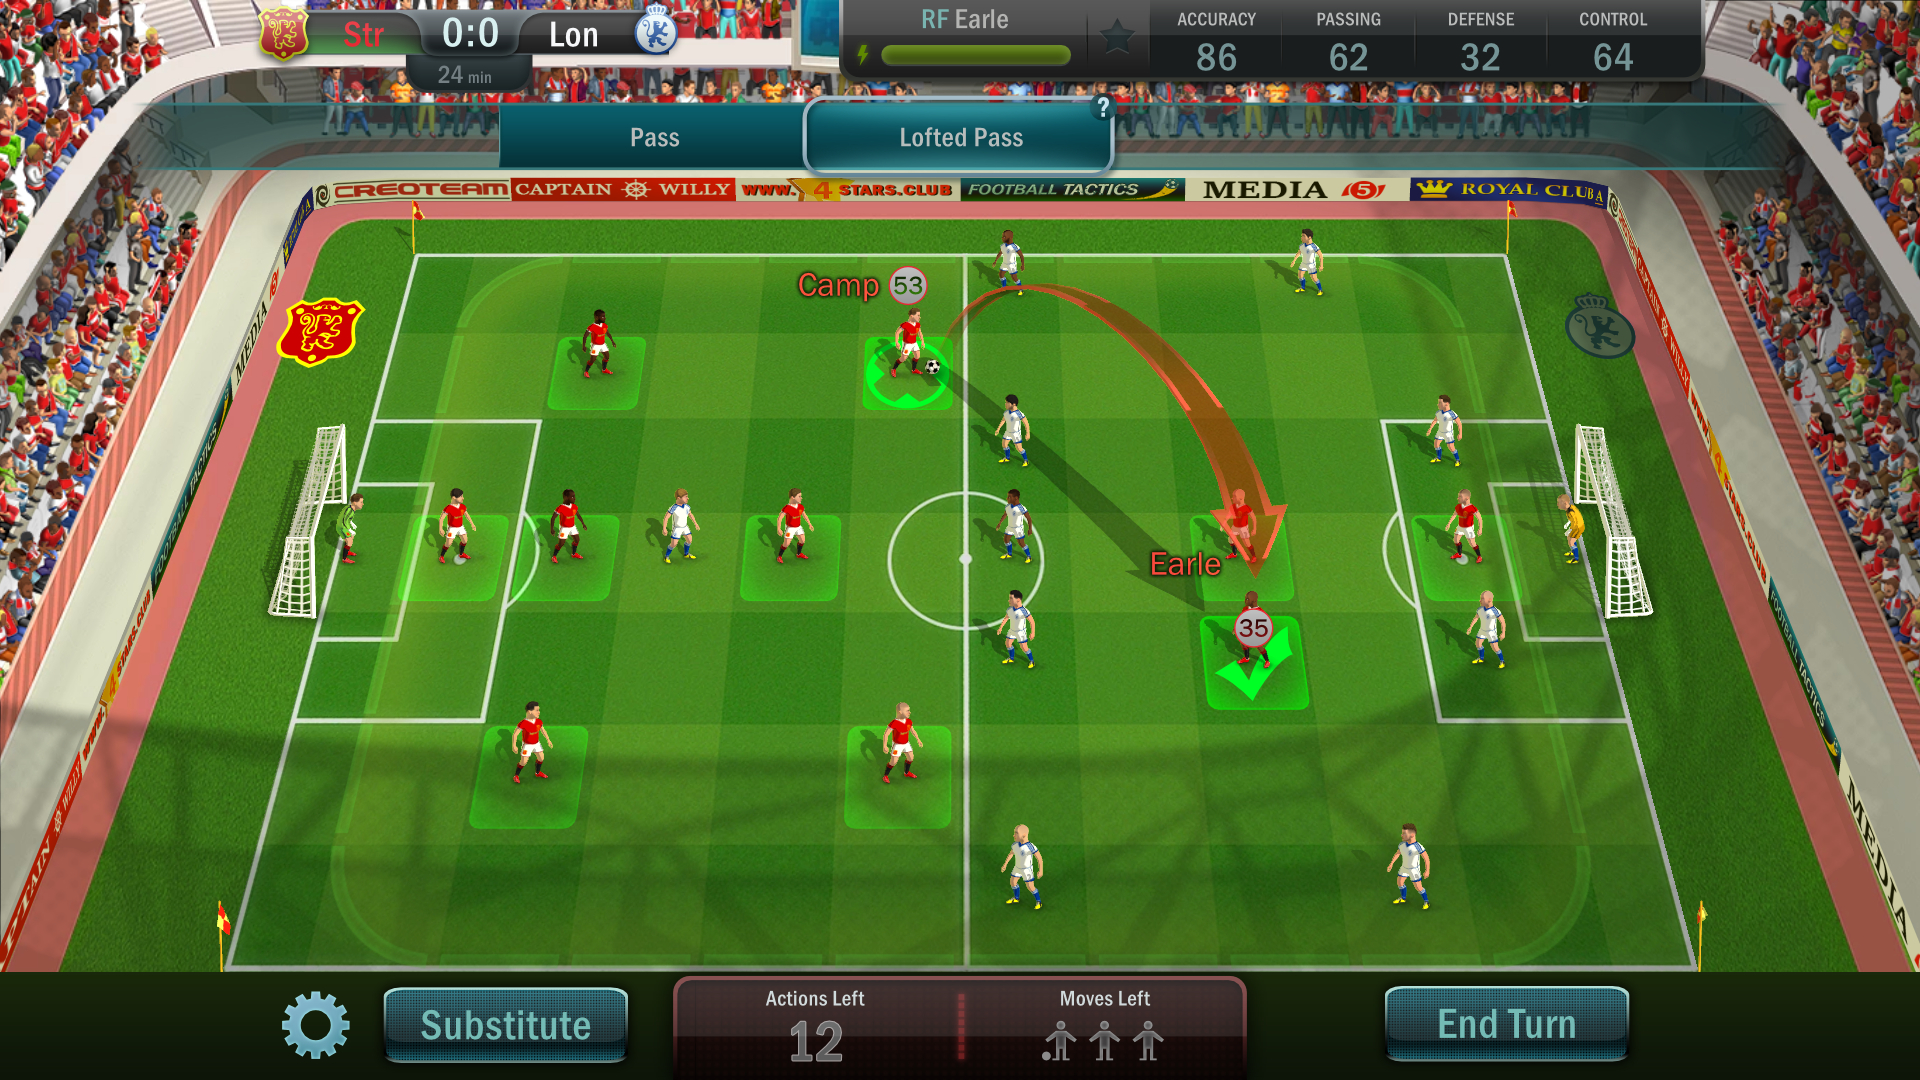 ‘Football, Tactics & Glory’ from Creoteam Is Coming to Mobile Thanks to Raylight Games